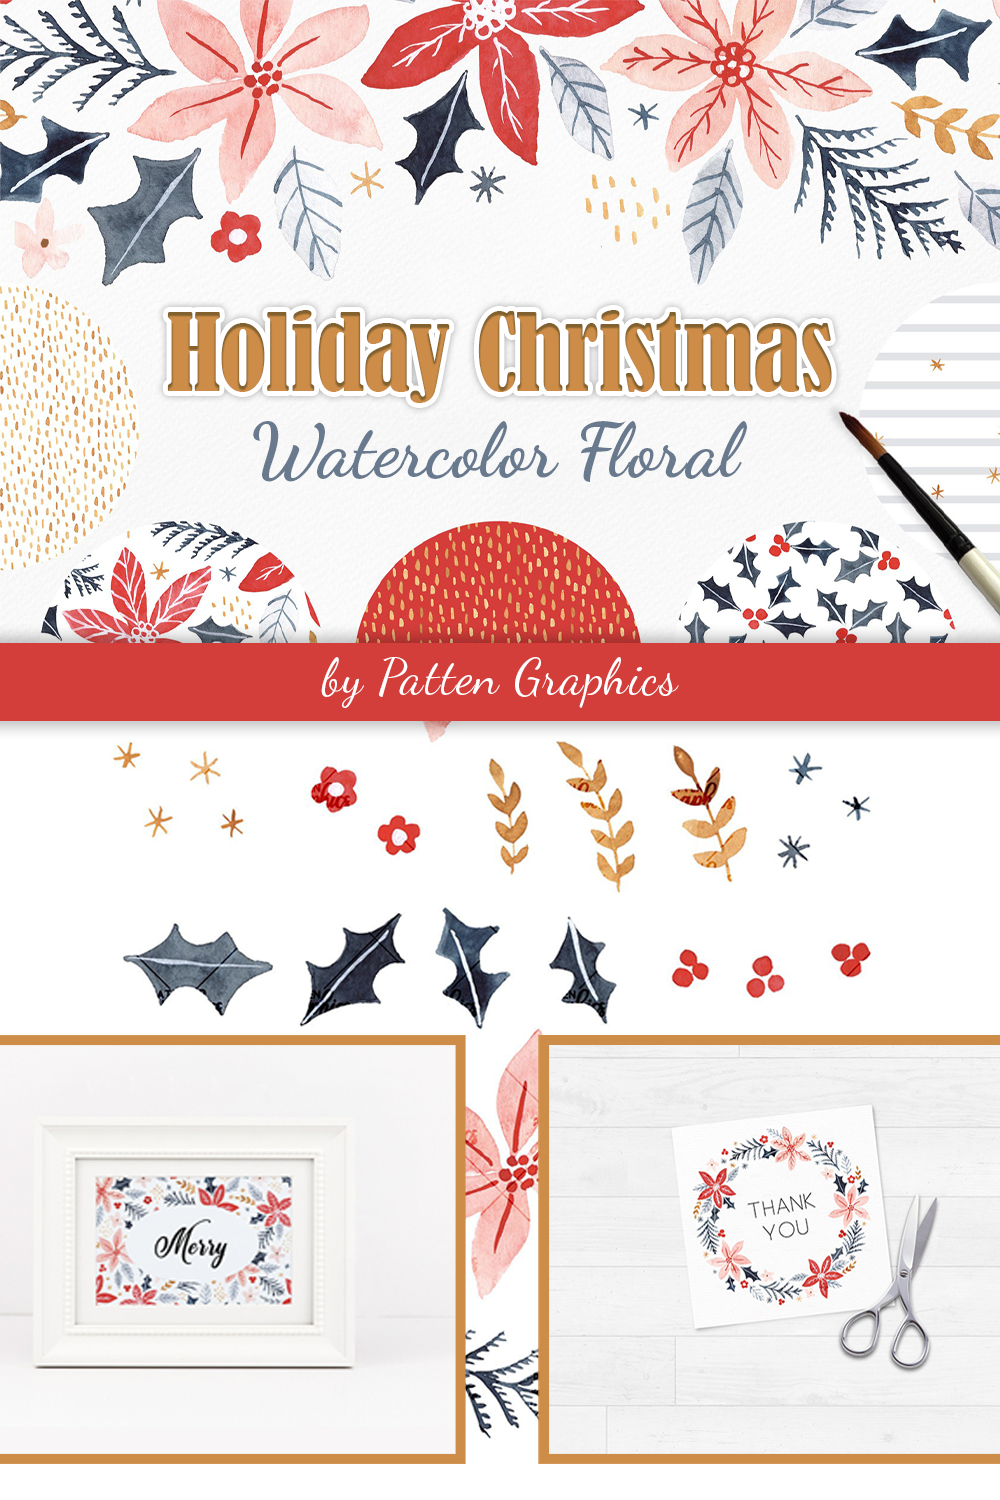 Holiday christmas watercolor floral of pinterest.